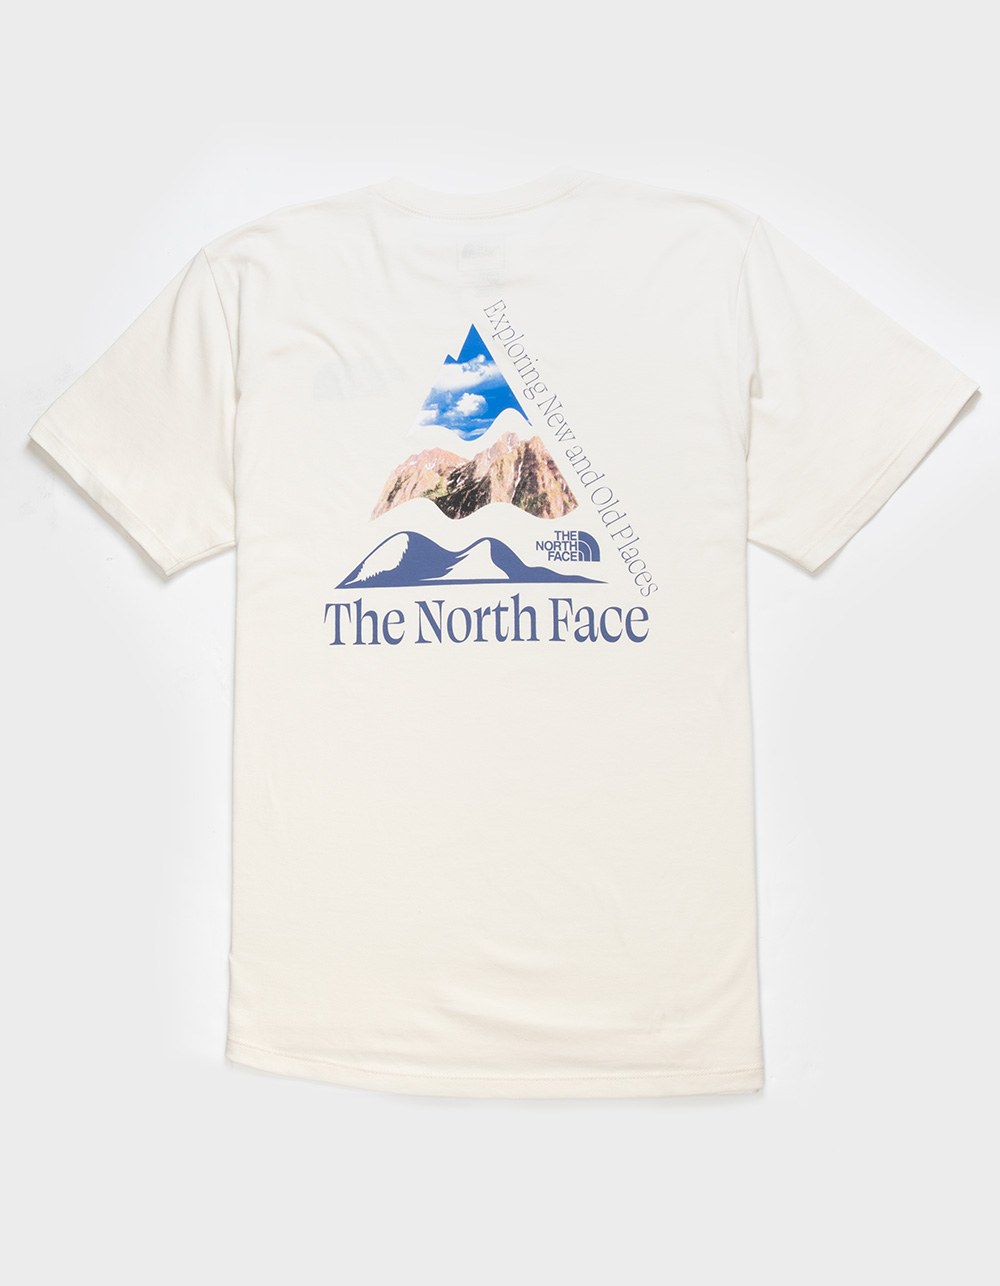 The North Face Clothing & Apparel | Tillys